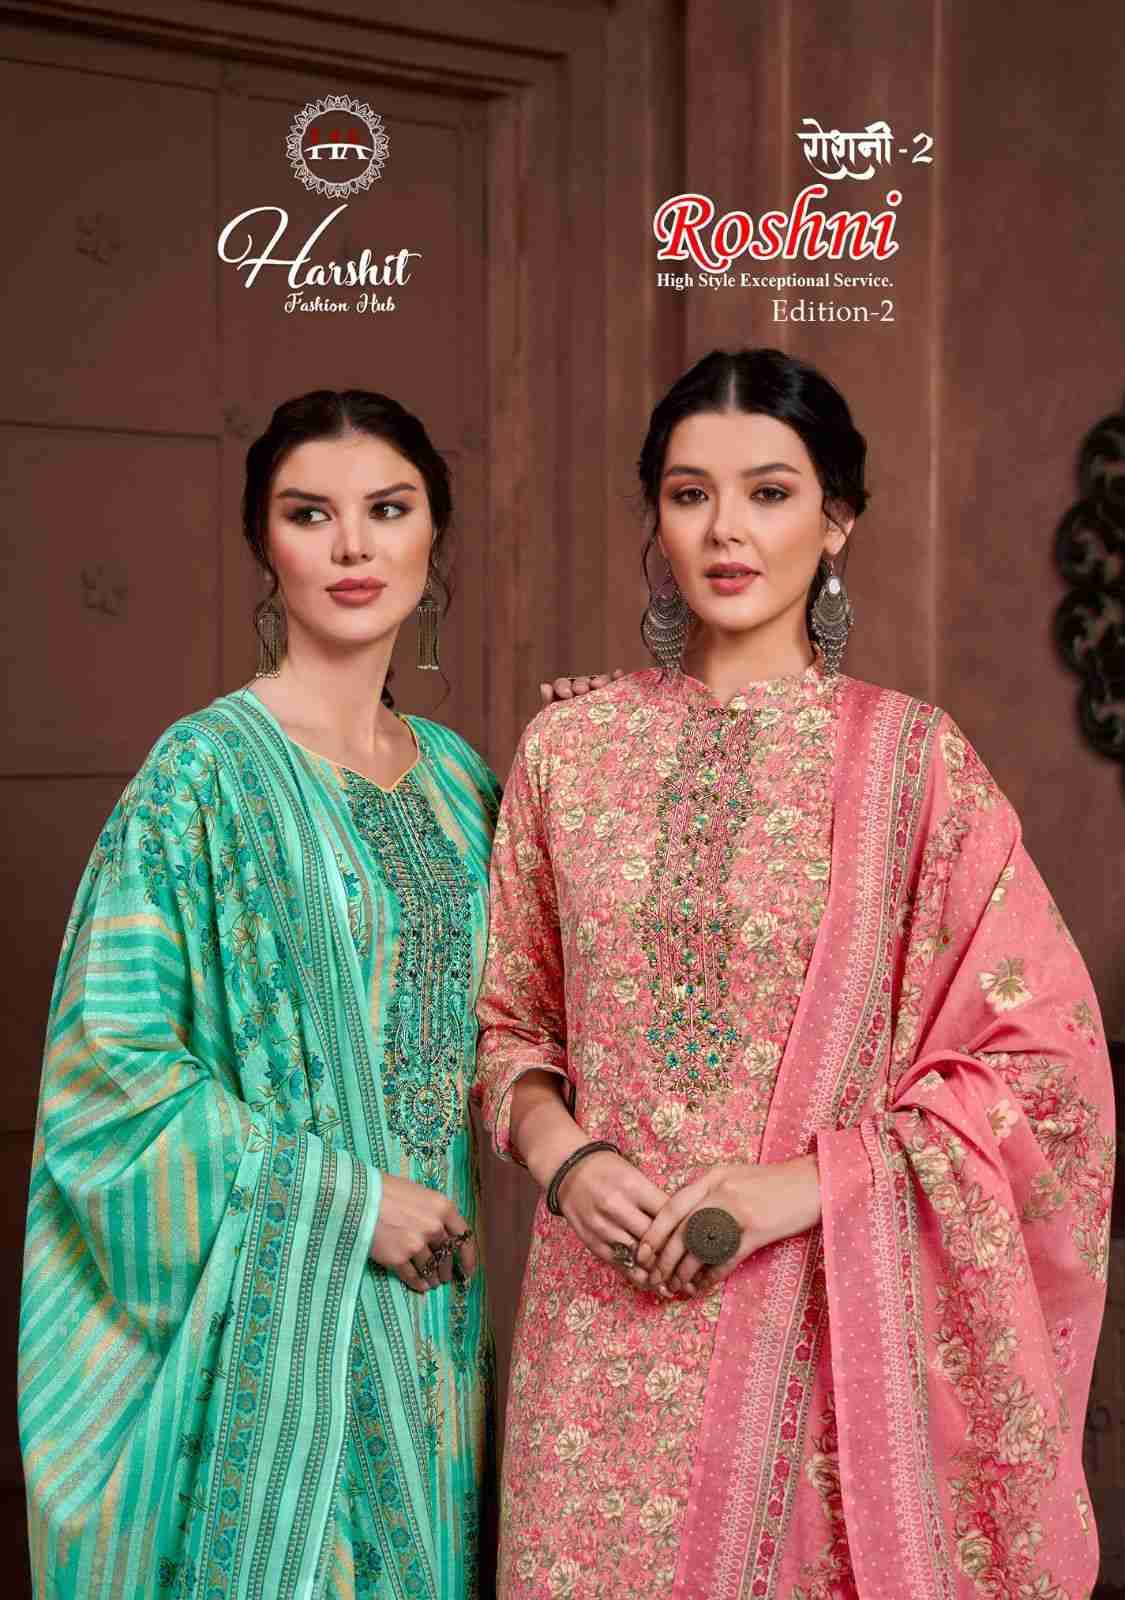 Roshni Vol-2 By Harshit Fashion Hub 1322-001 To 1322-008 Series Beautiful Festive Suits Stylish Fancy Colorful Casual Wear & Ethnic Wear Pure Cotton Print Dresses At Wholesale Price